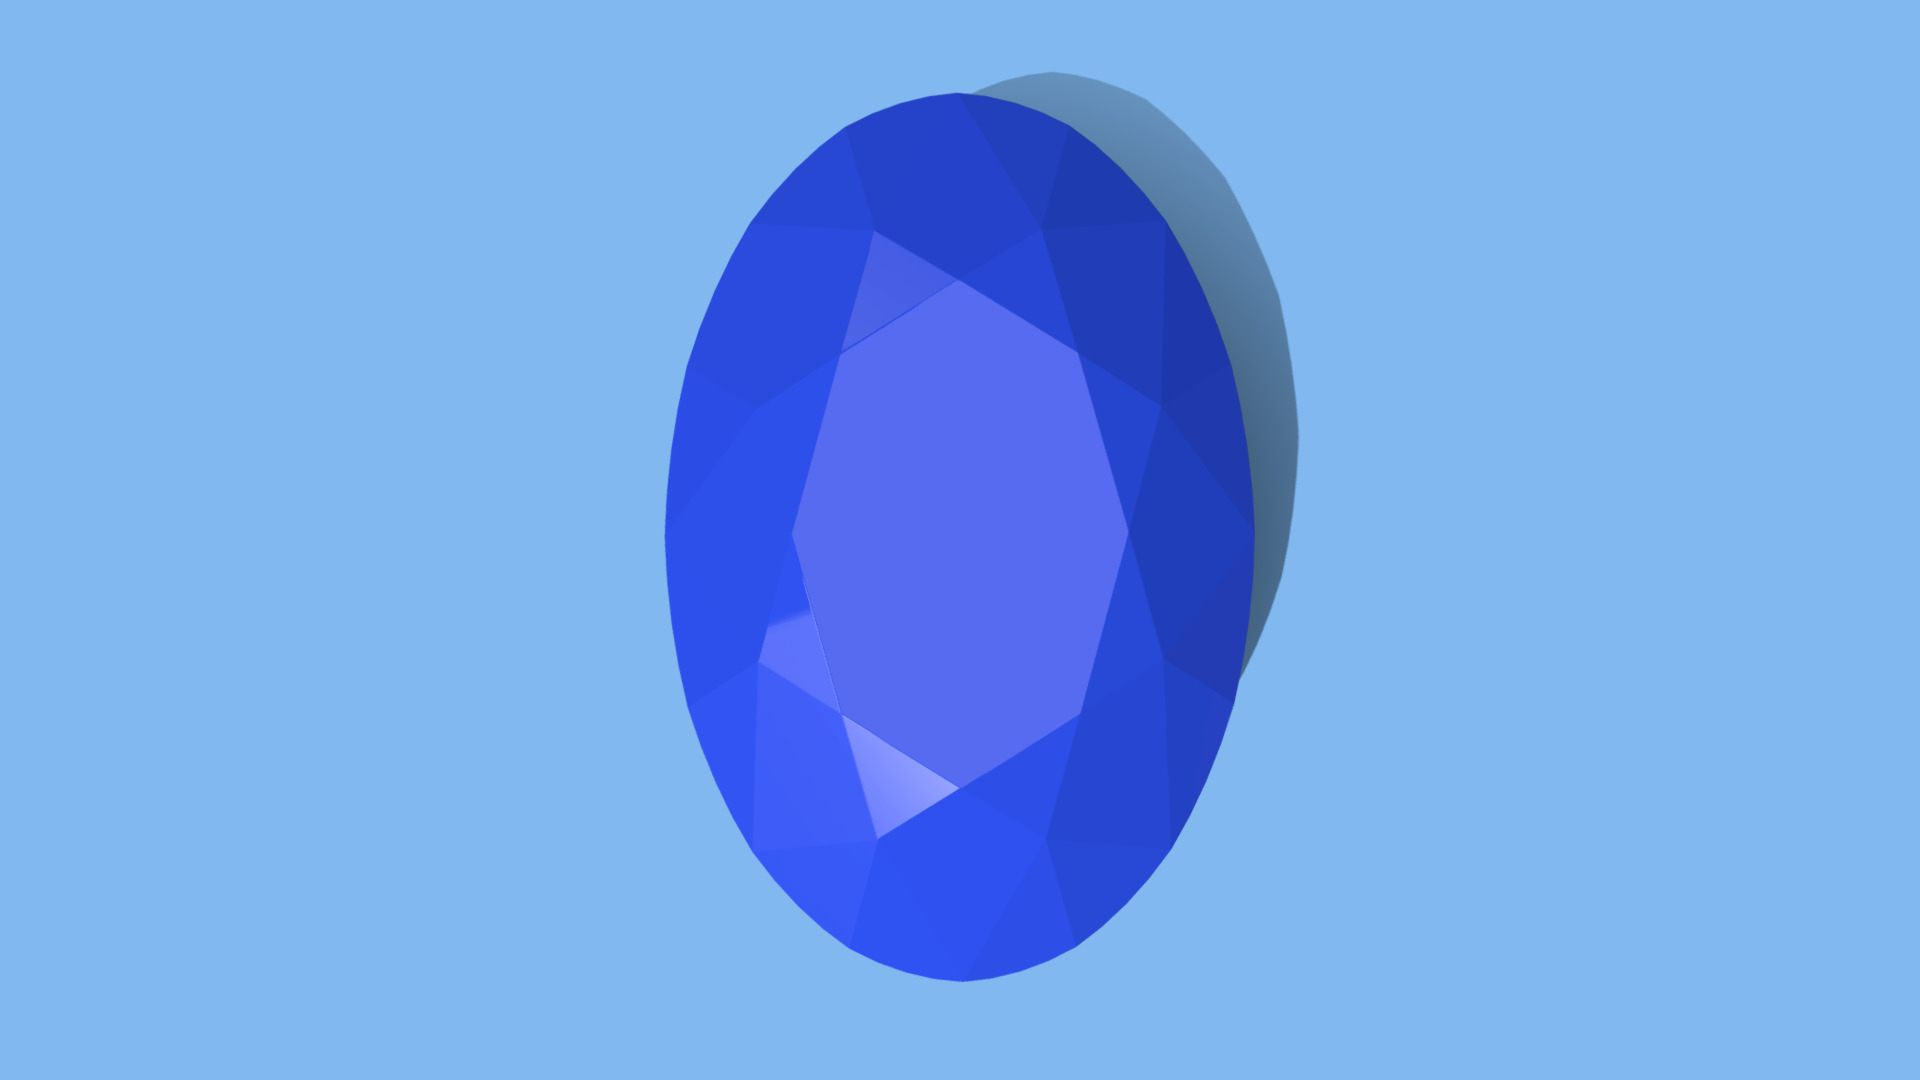 3D model Sapphire Gem – Oval Cut - This is a 3D model of the Sapphire Gem - Oval Cut. The 3D model is about a blue logo with a white circle.